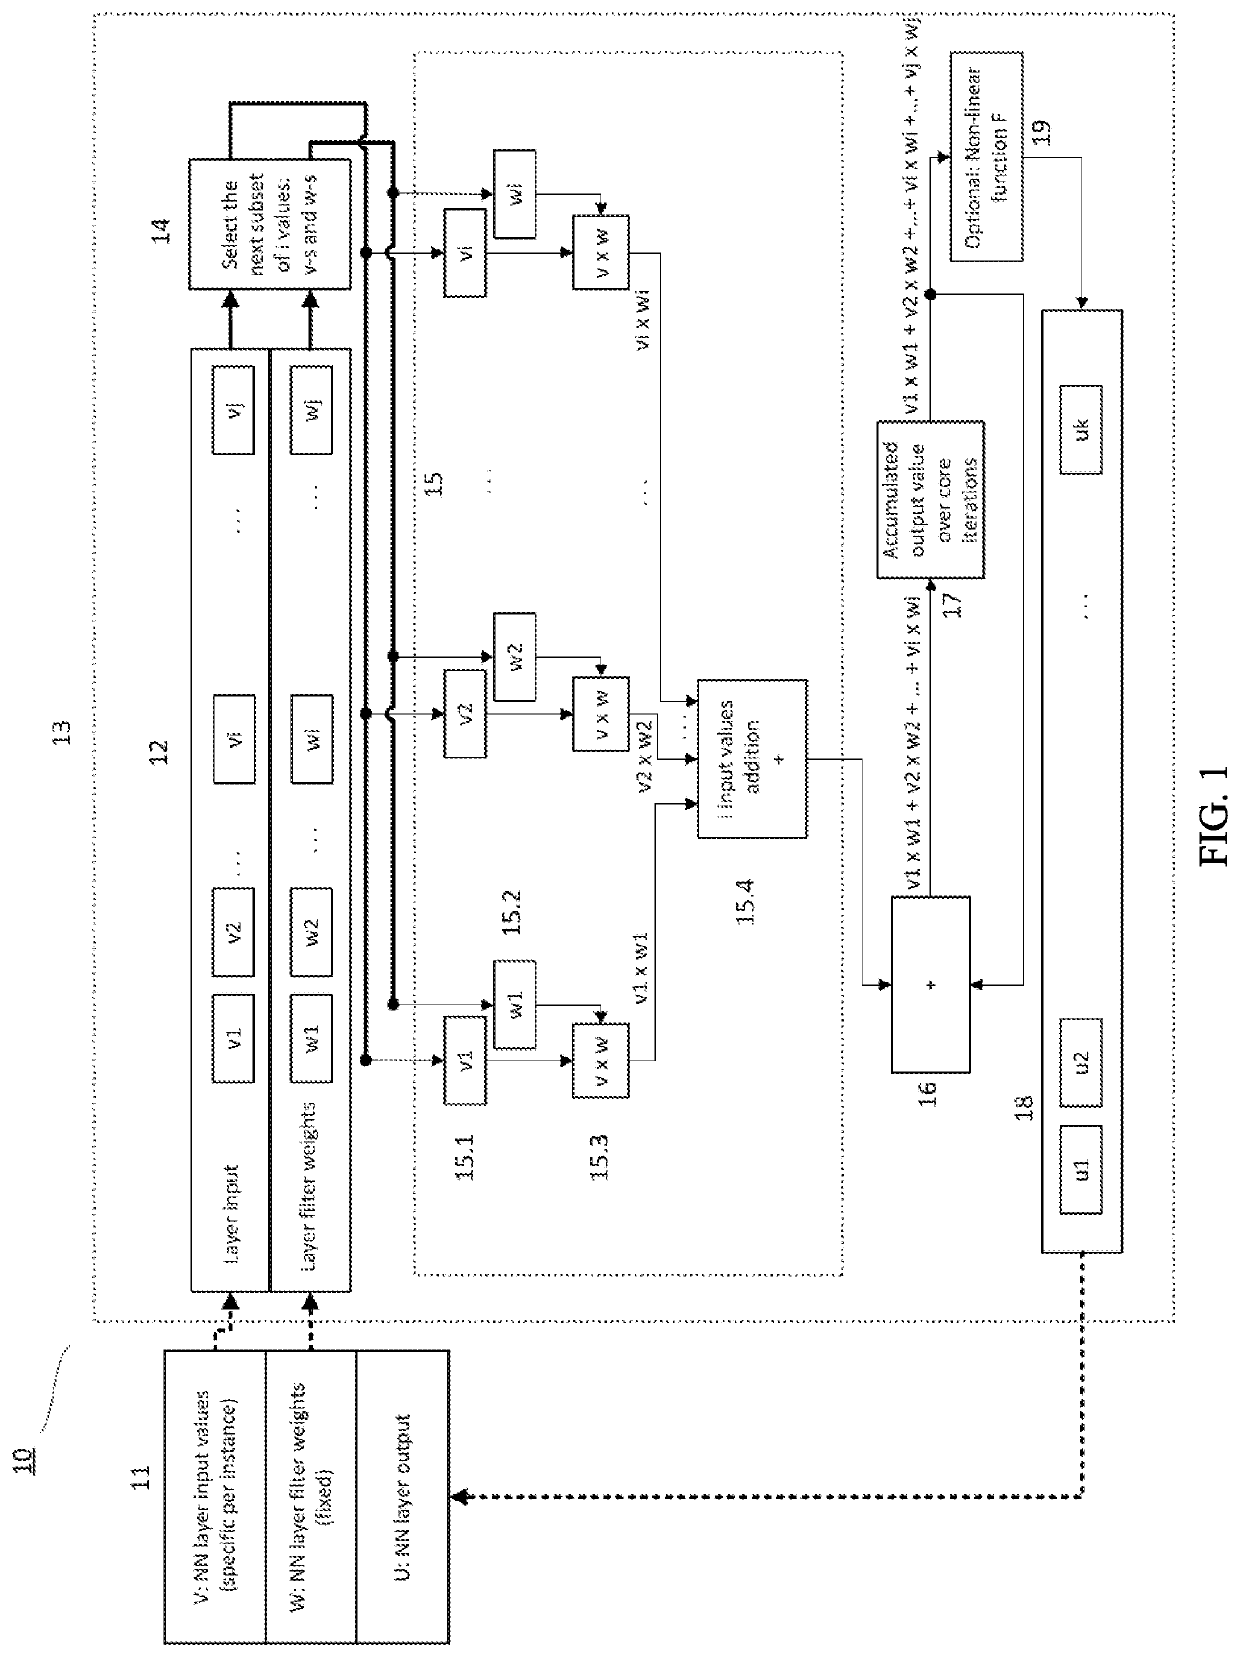 Low-power hardware acceleration method and system for convolution neural network computation